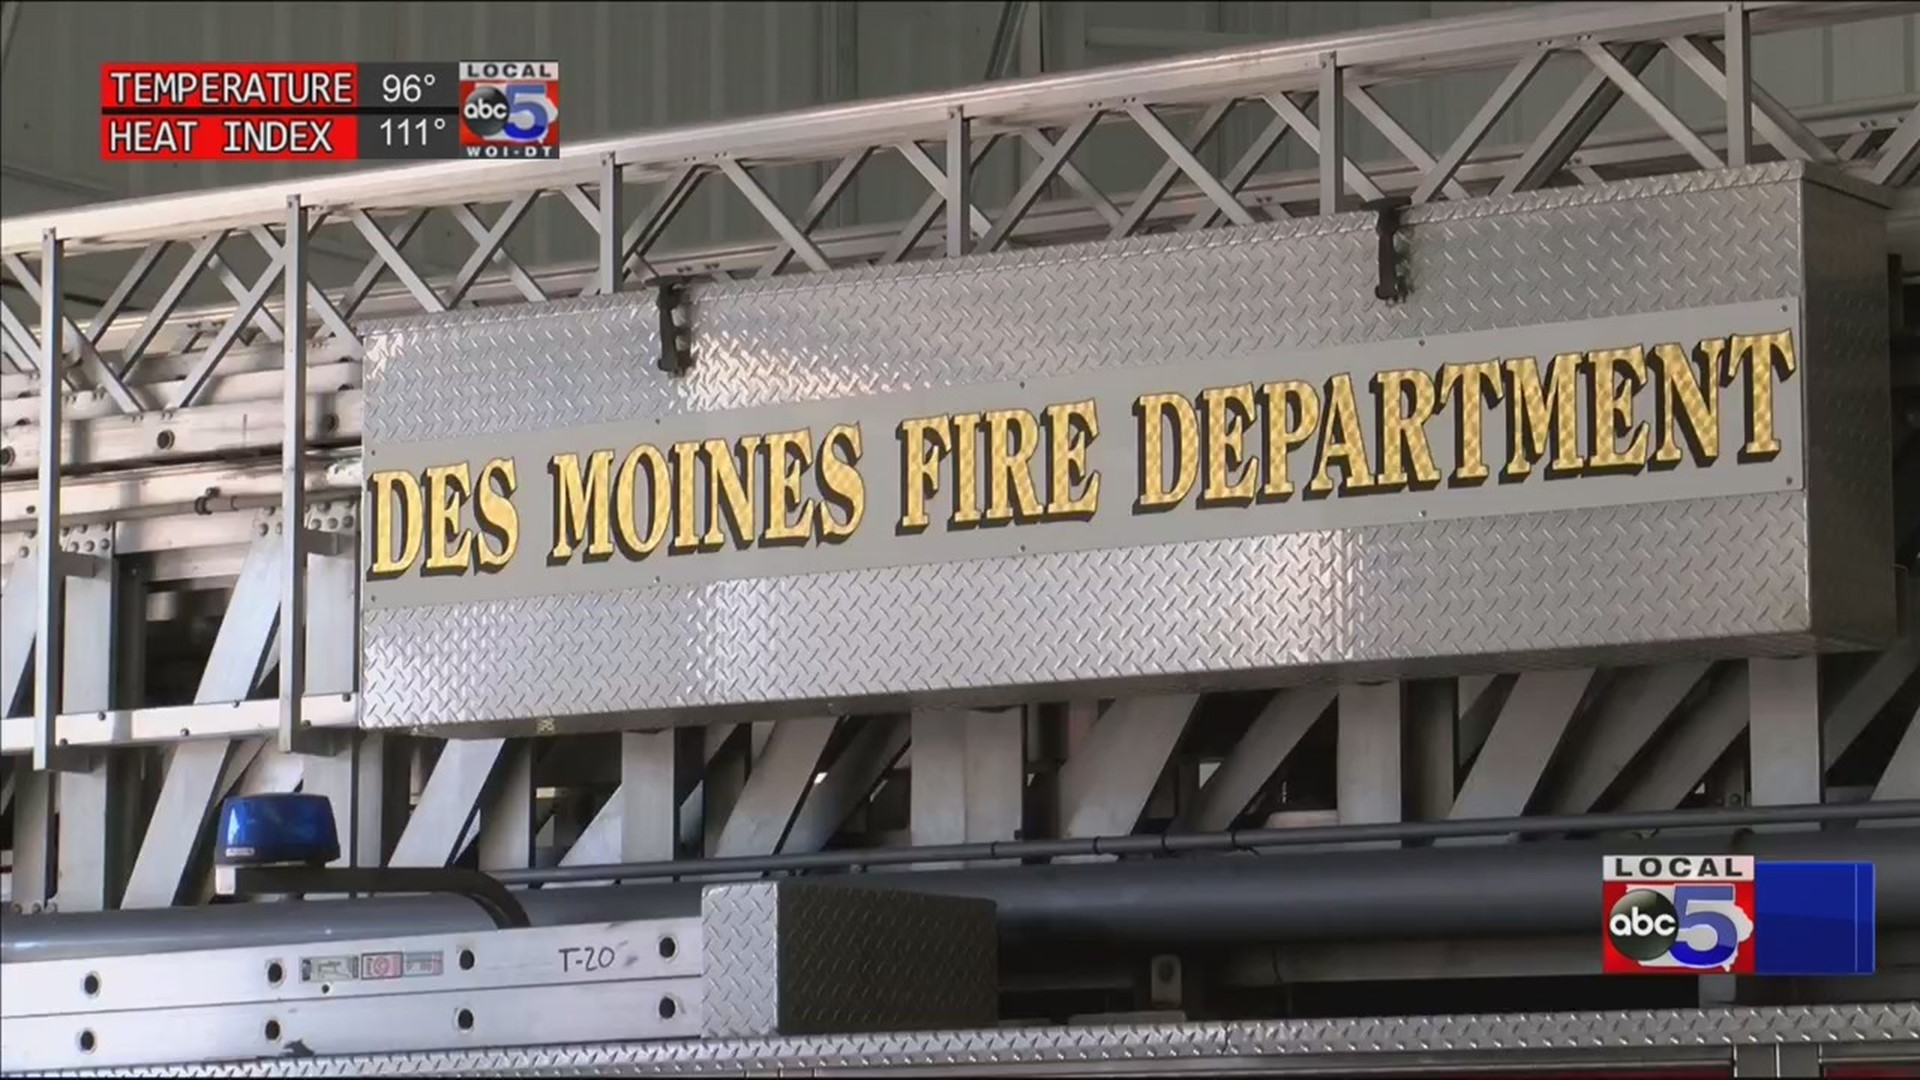 DSM Fire Department sees uptick in heat-related calls